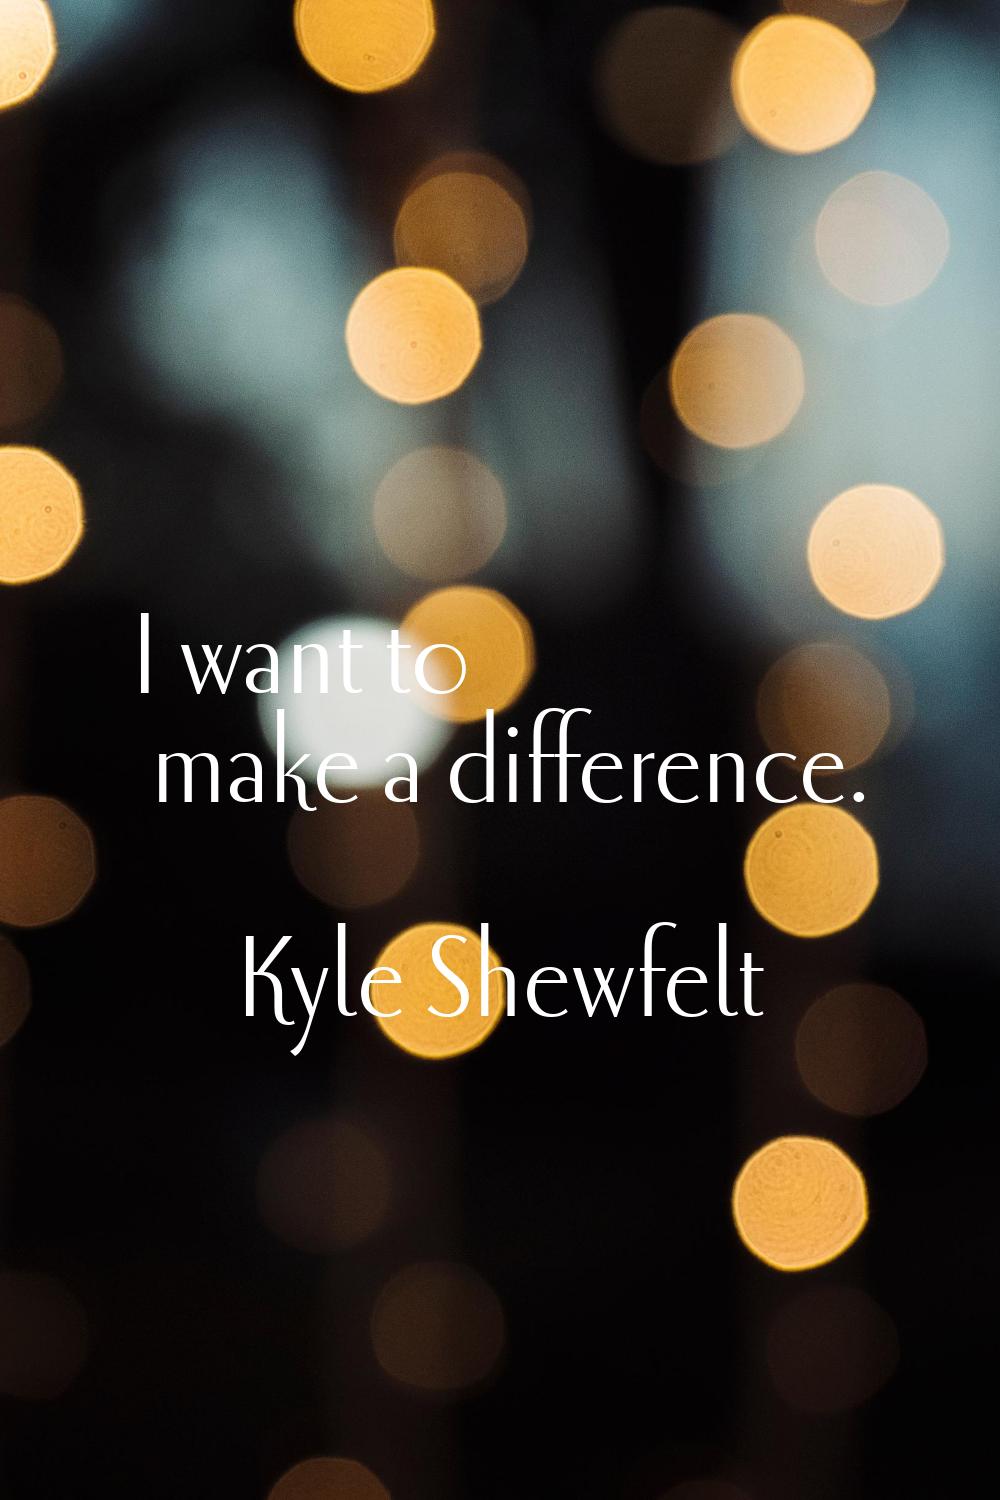 I want to make a difference.